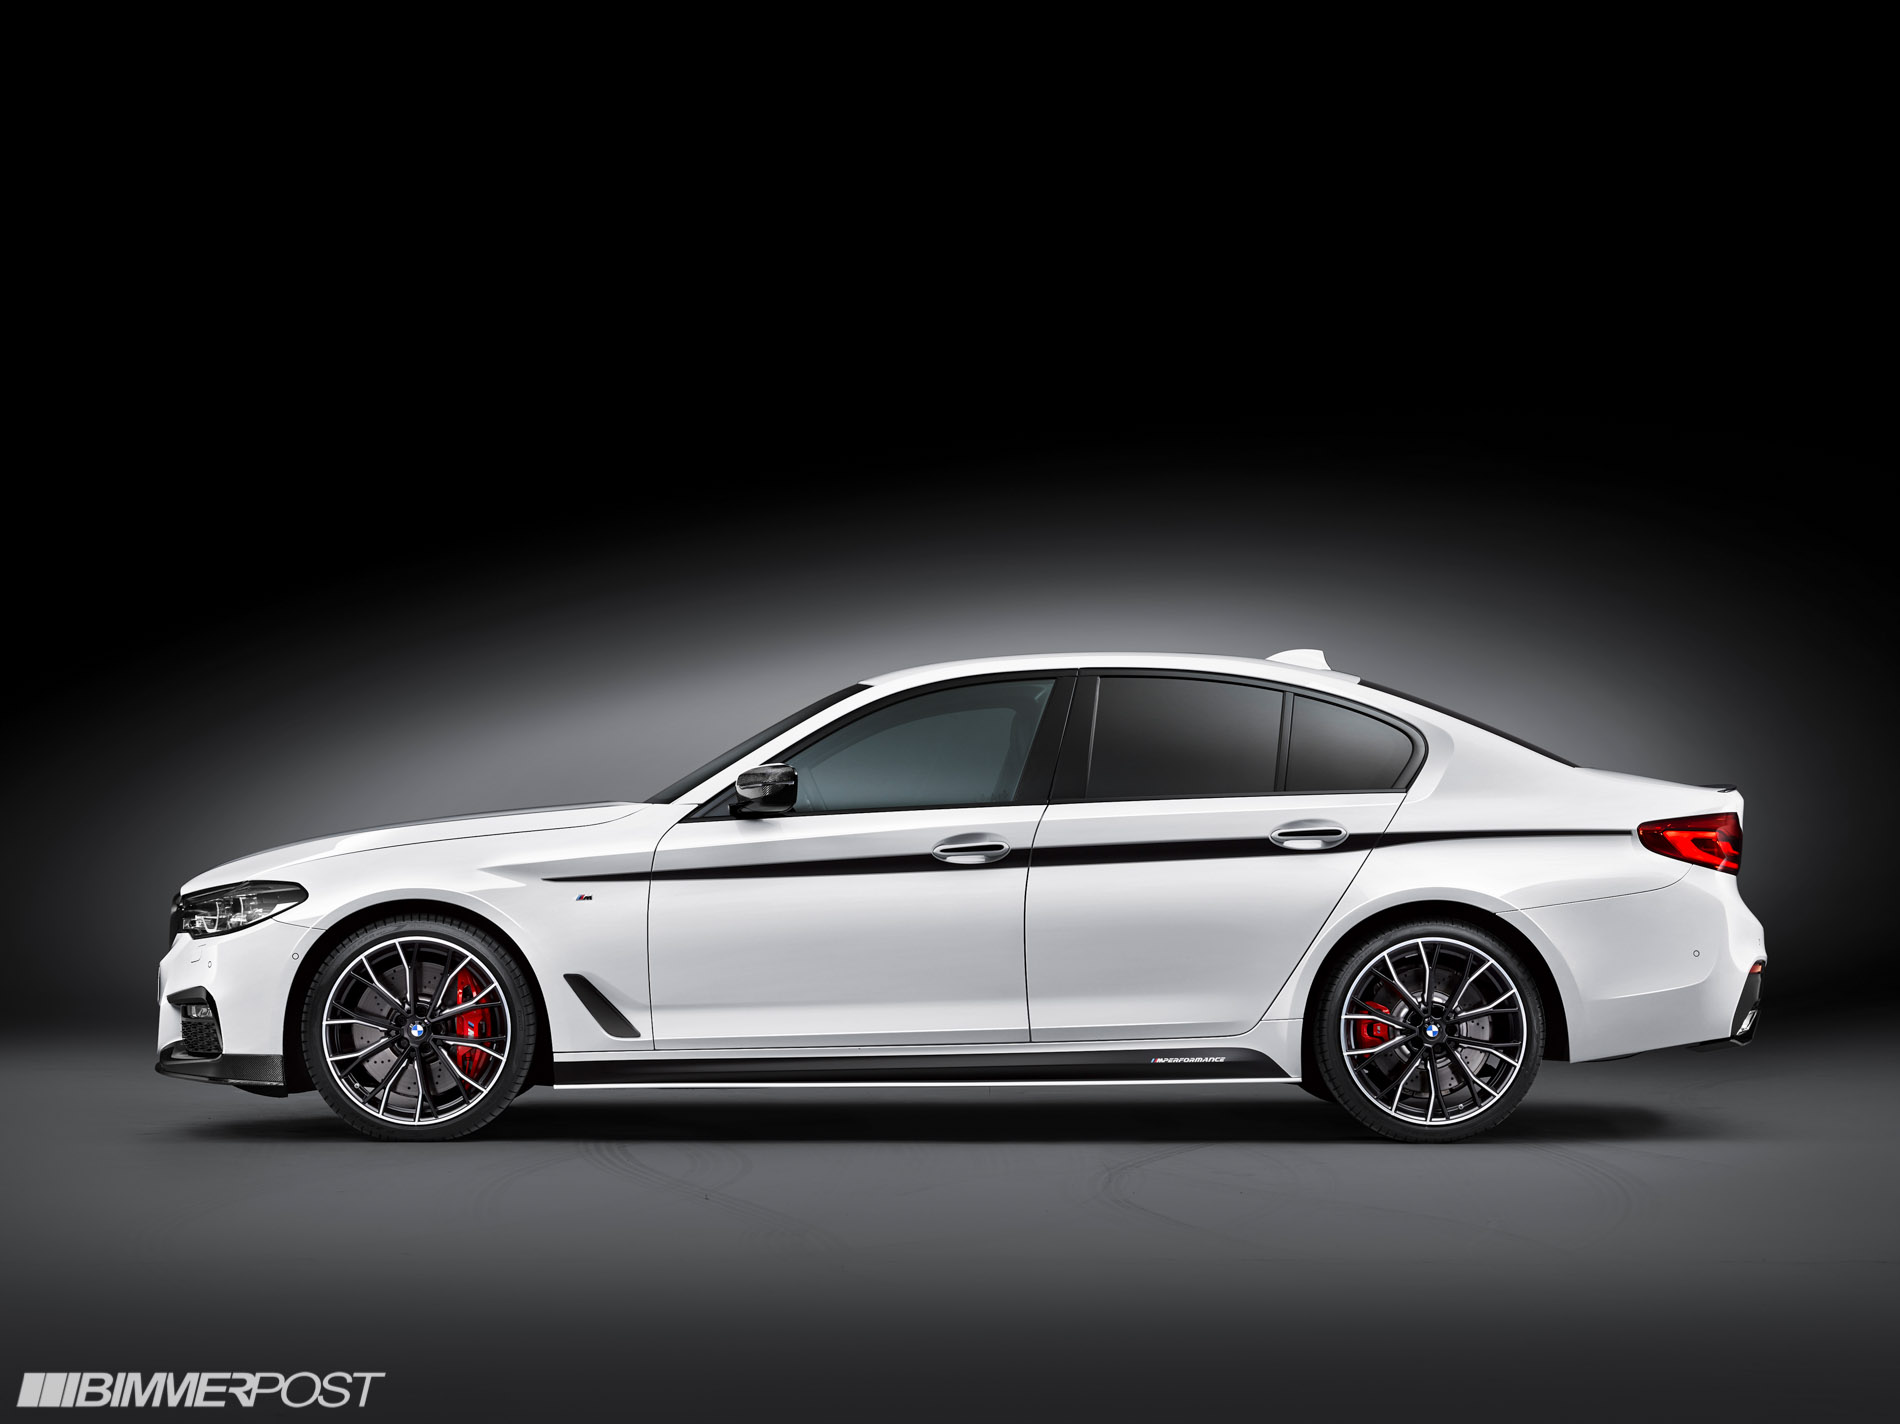 BMW M Performance Parts Officially Announced for G30 5 Series - BMW 5-Series  Forum (G30)